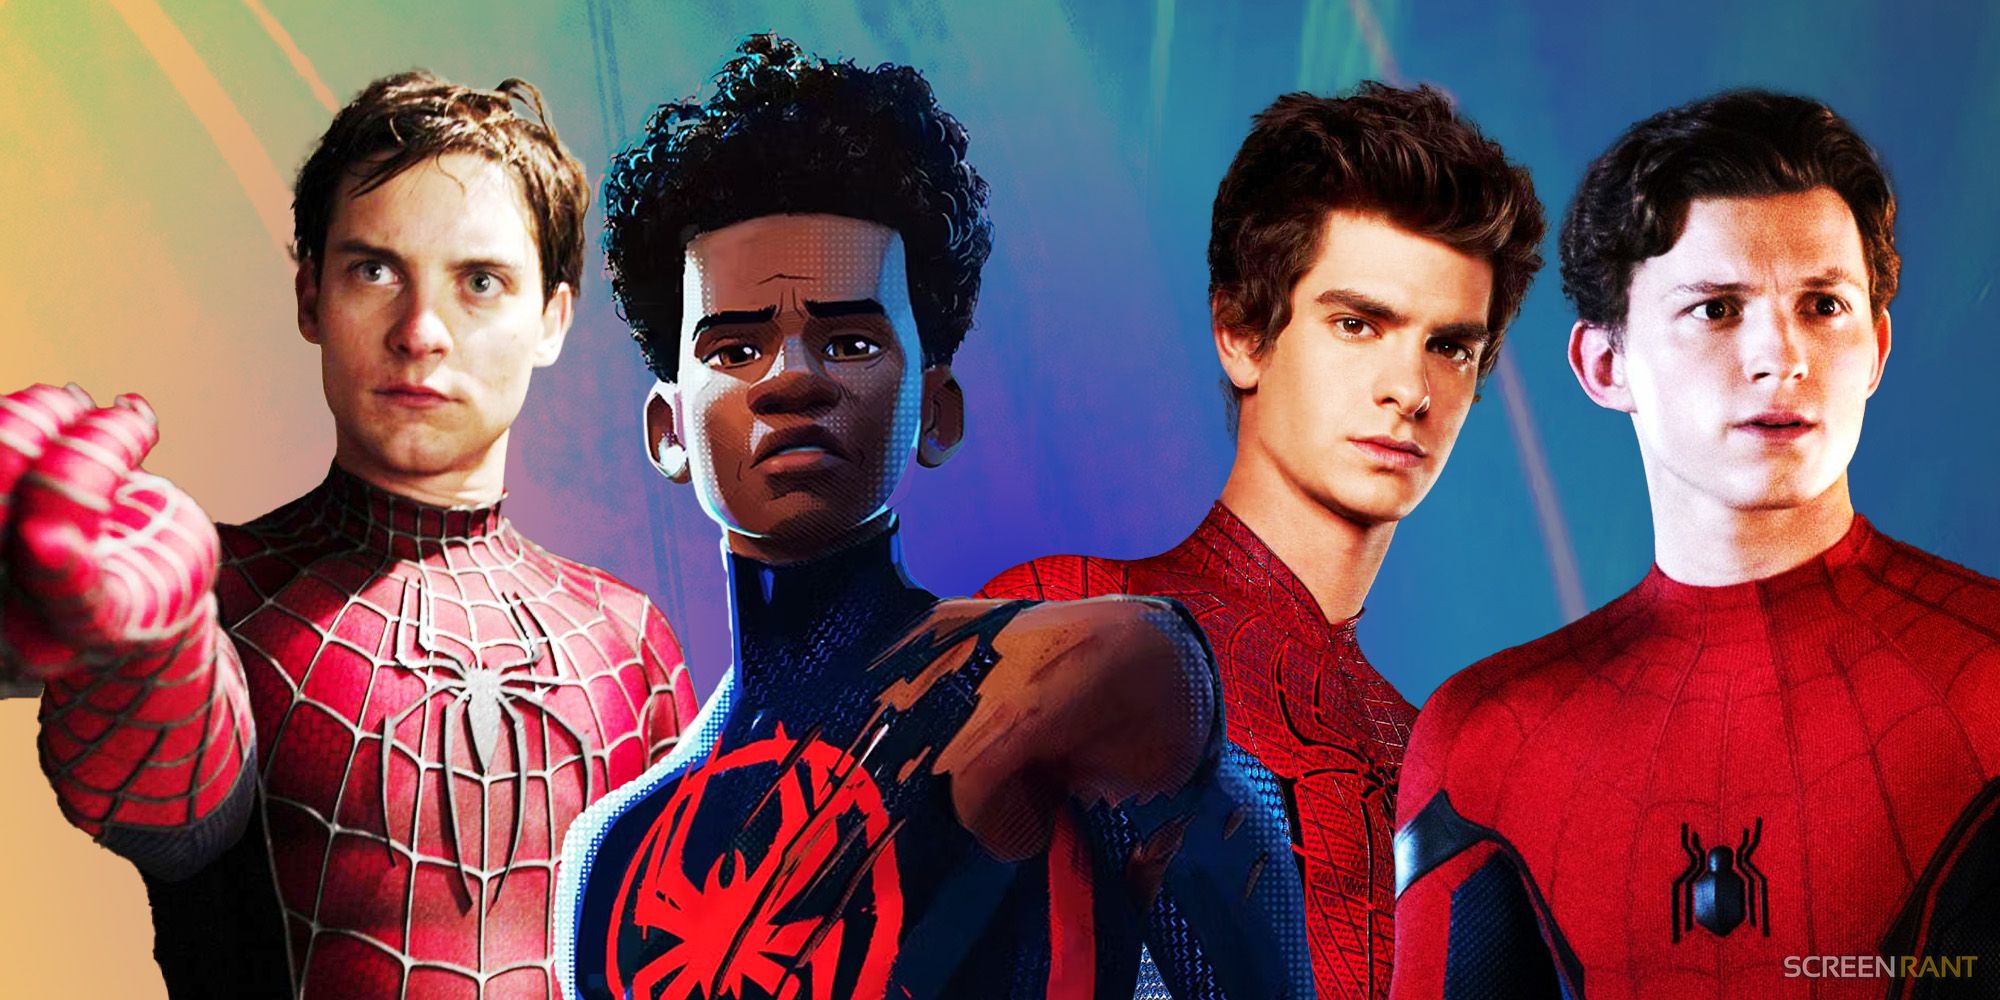 Custom image of Tobey Maguire, Spider-Verse Miles Morales, Andrew Garfield, and Tom Holland's versions of Spider-Man. 